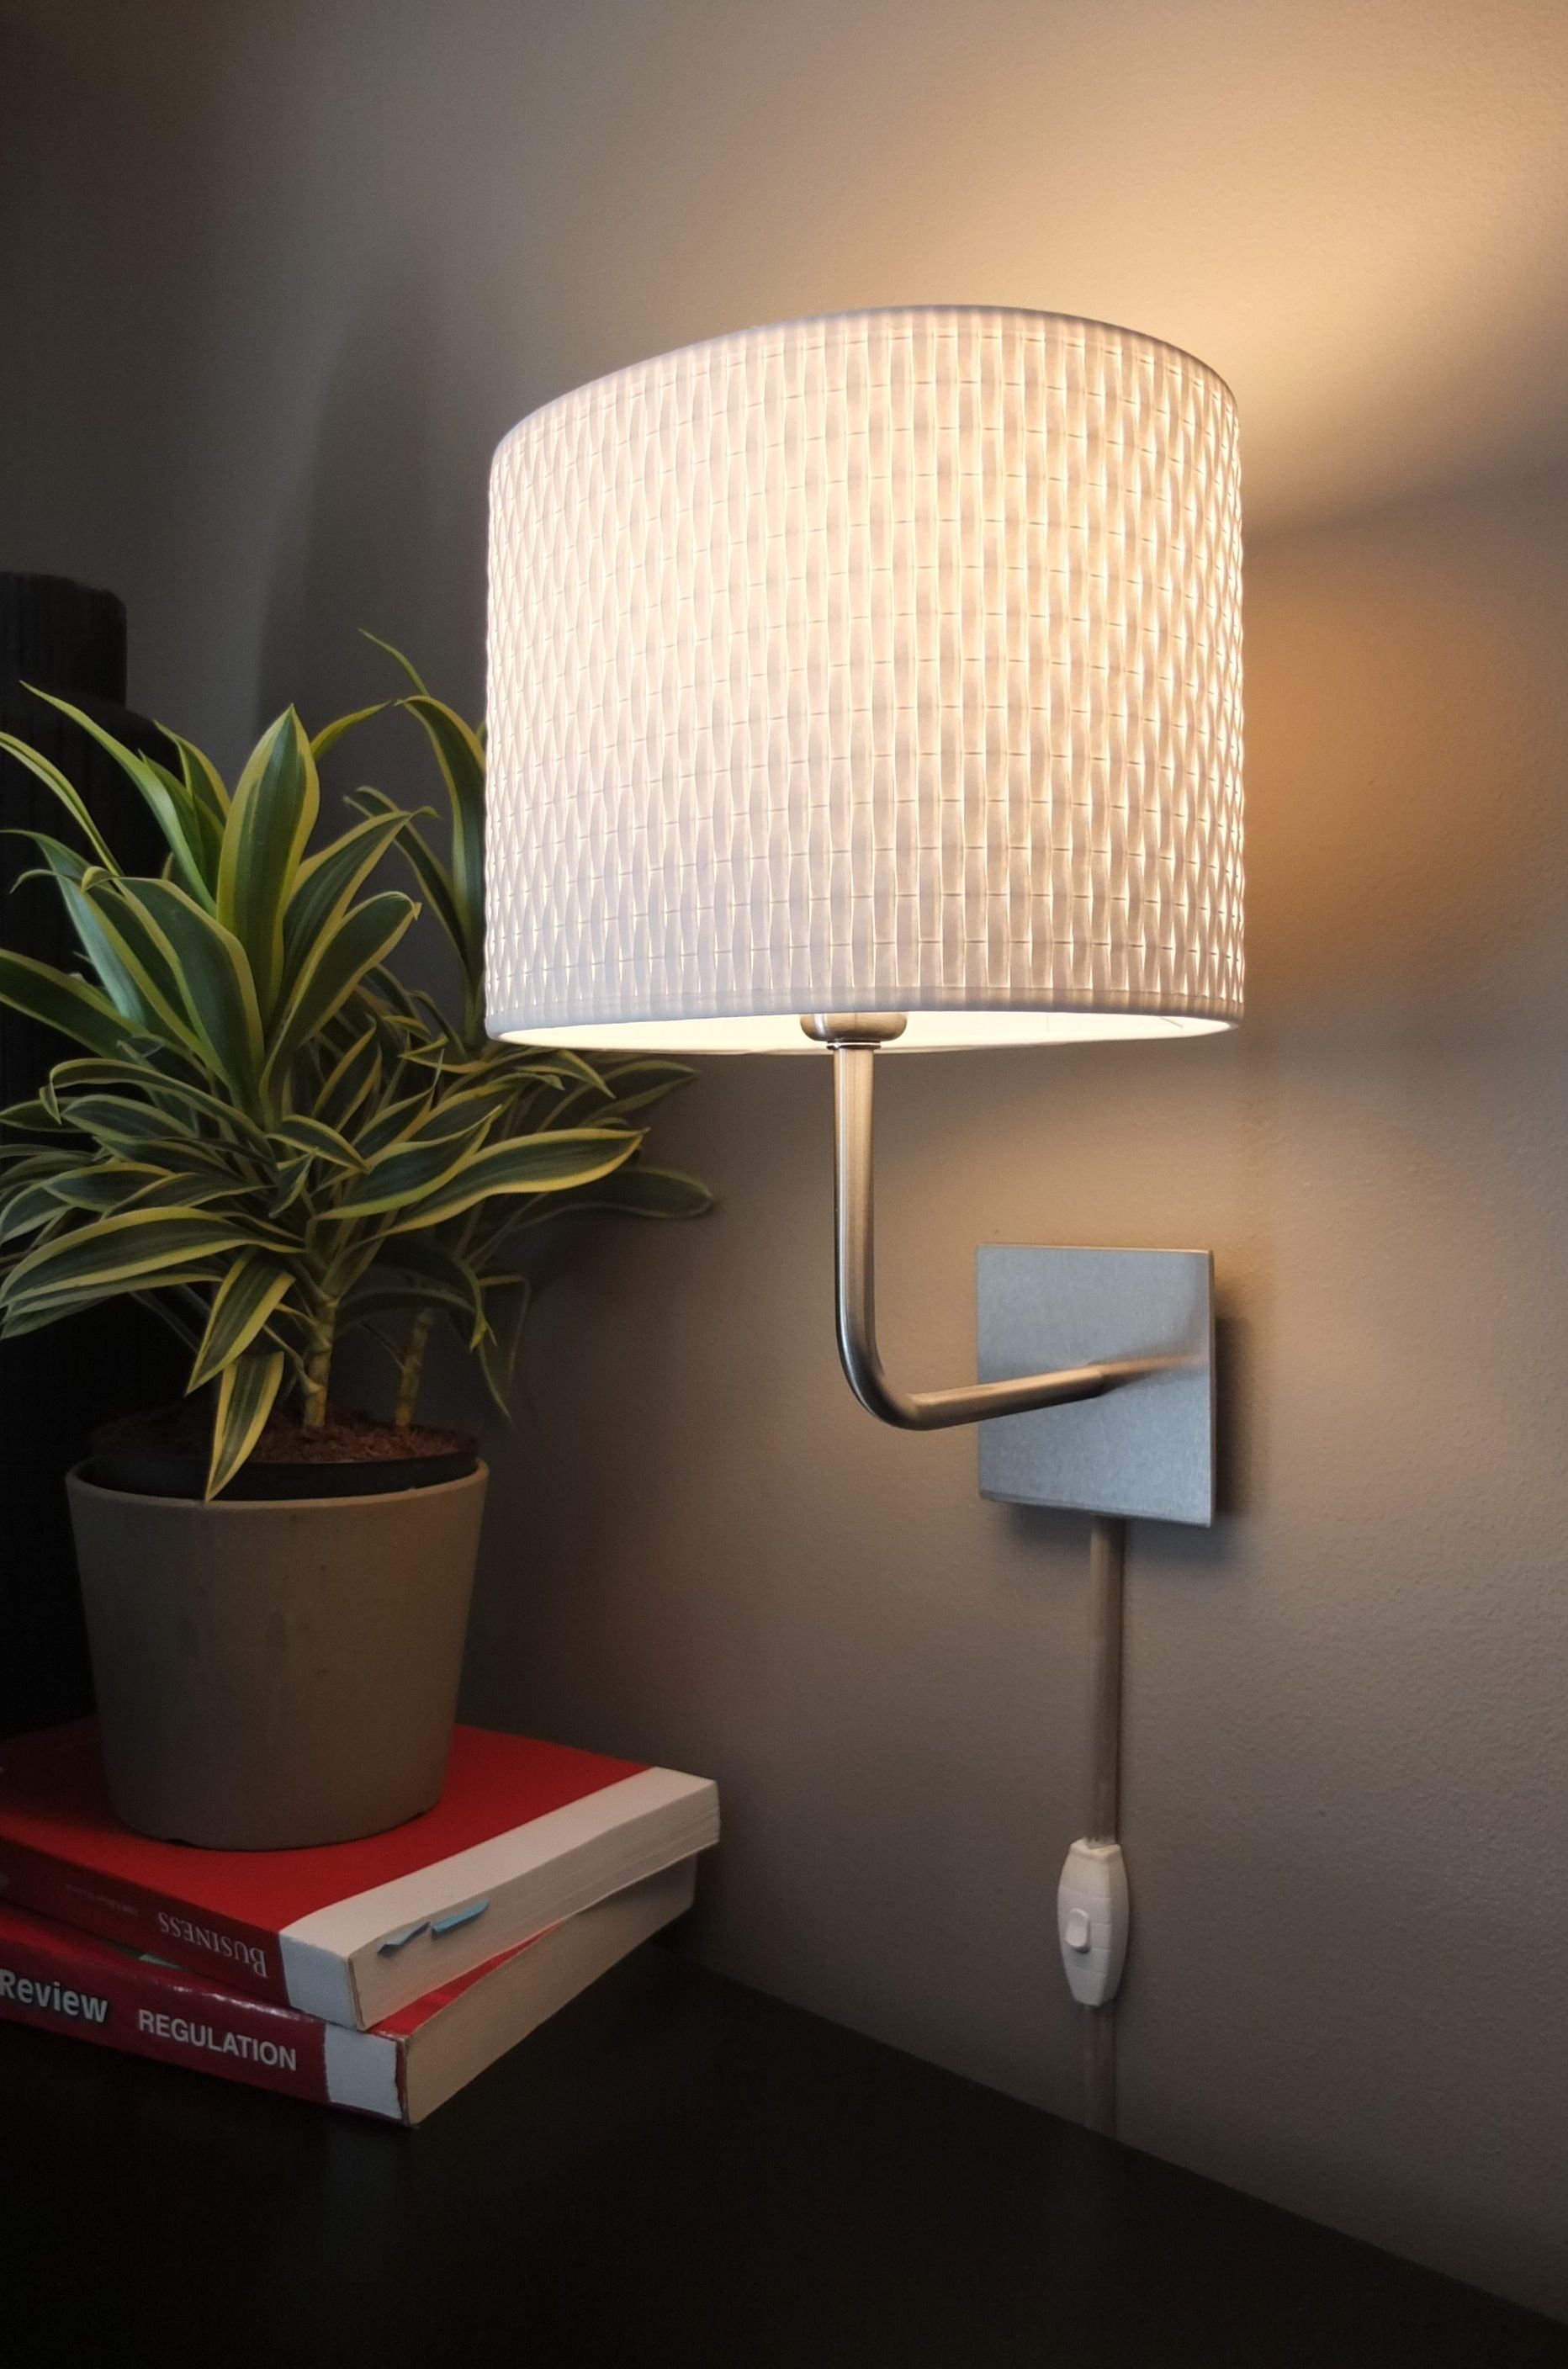 Wall-mounted IKEA lamps are an easy way to add light in a room ...